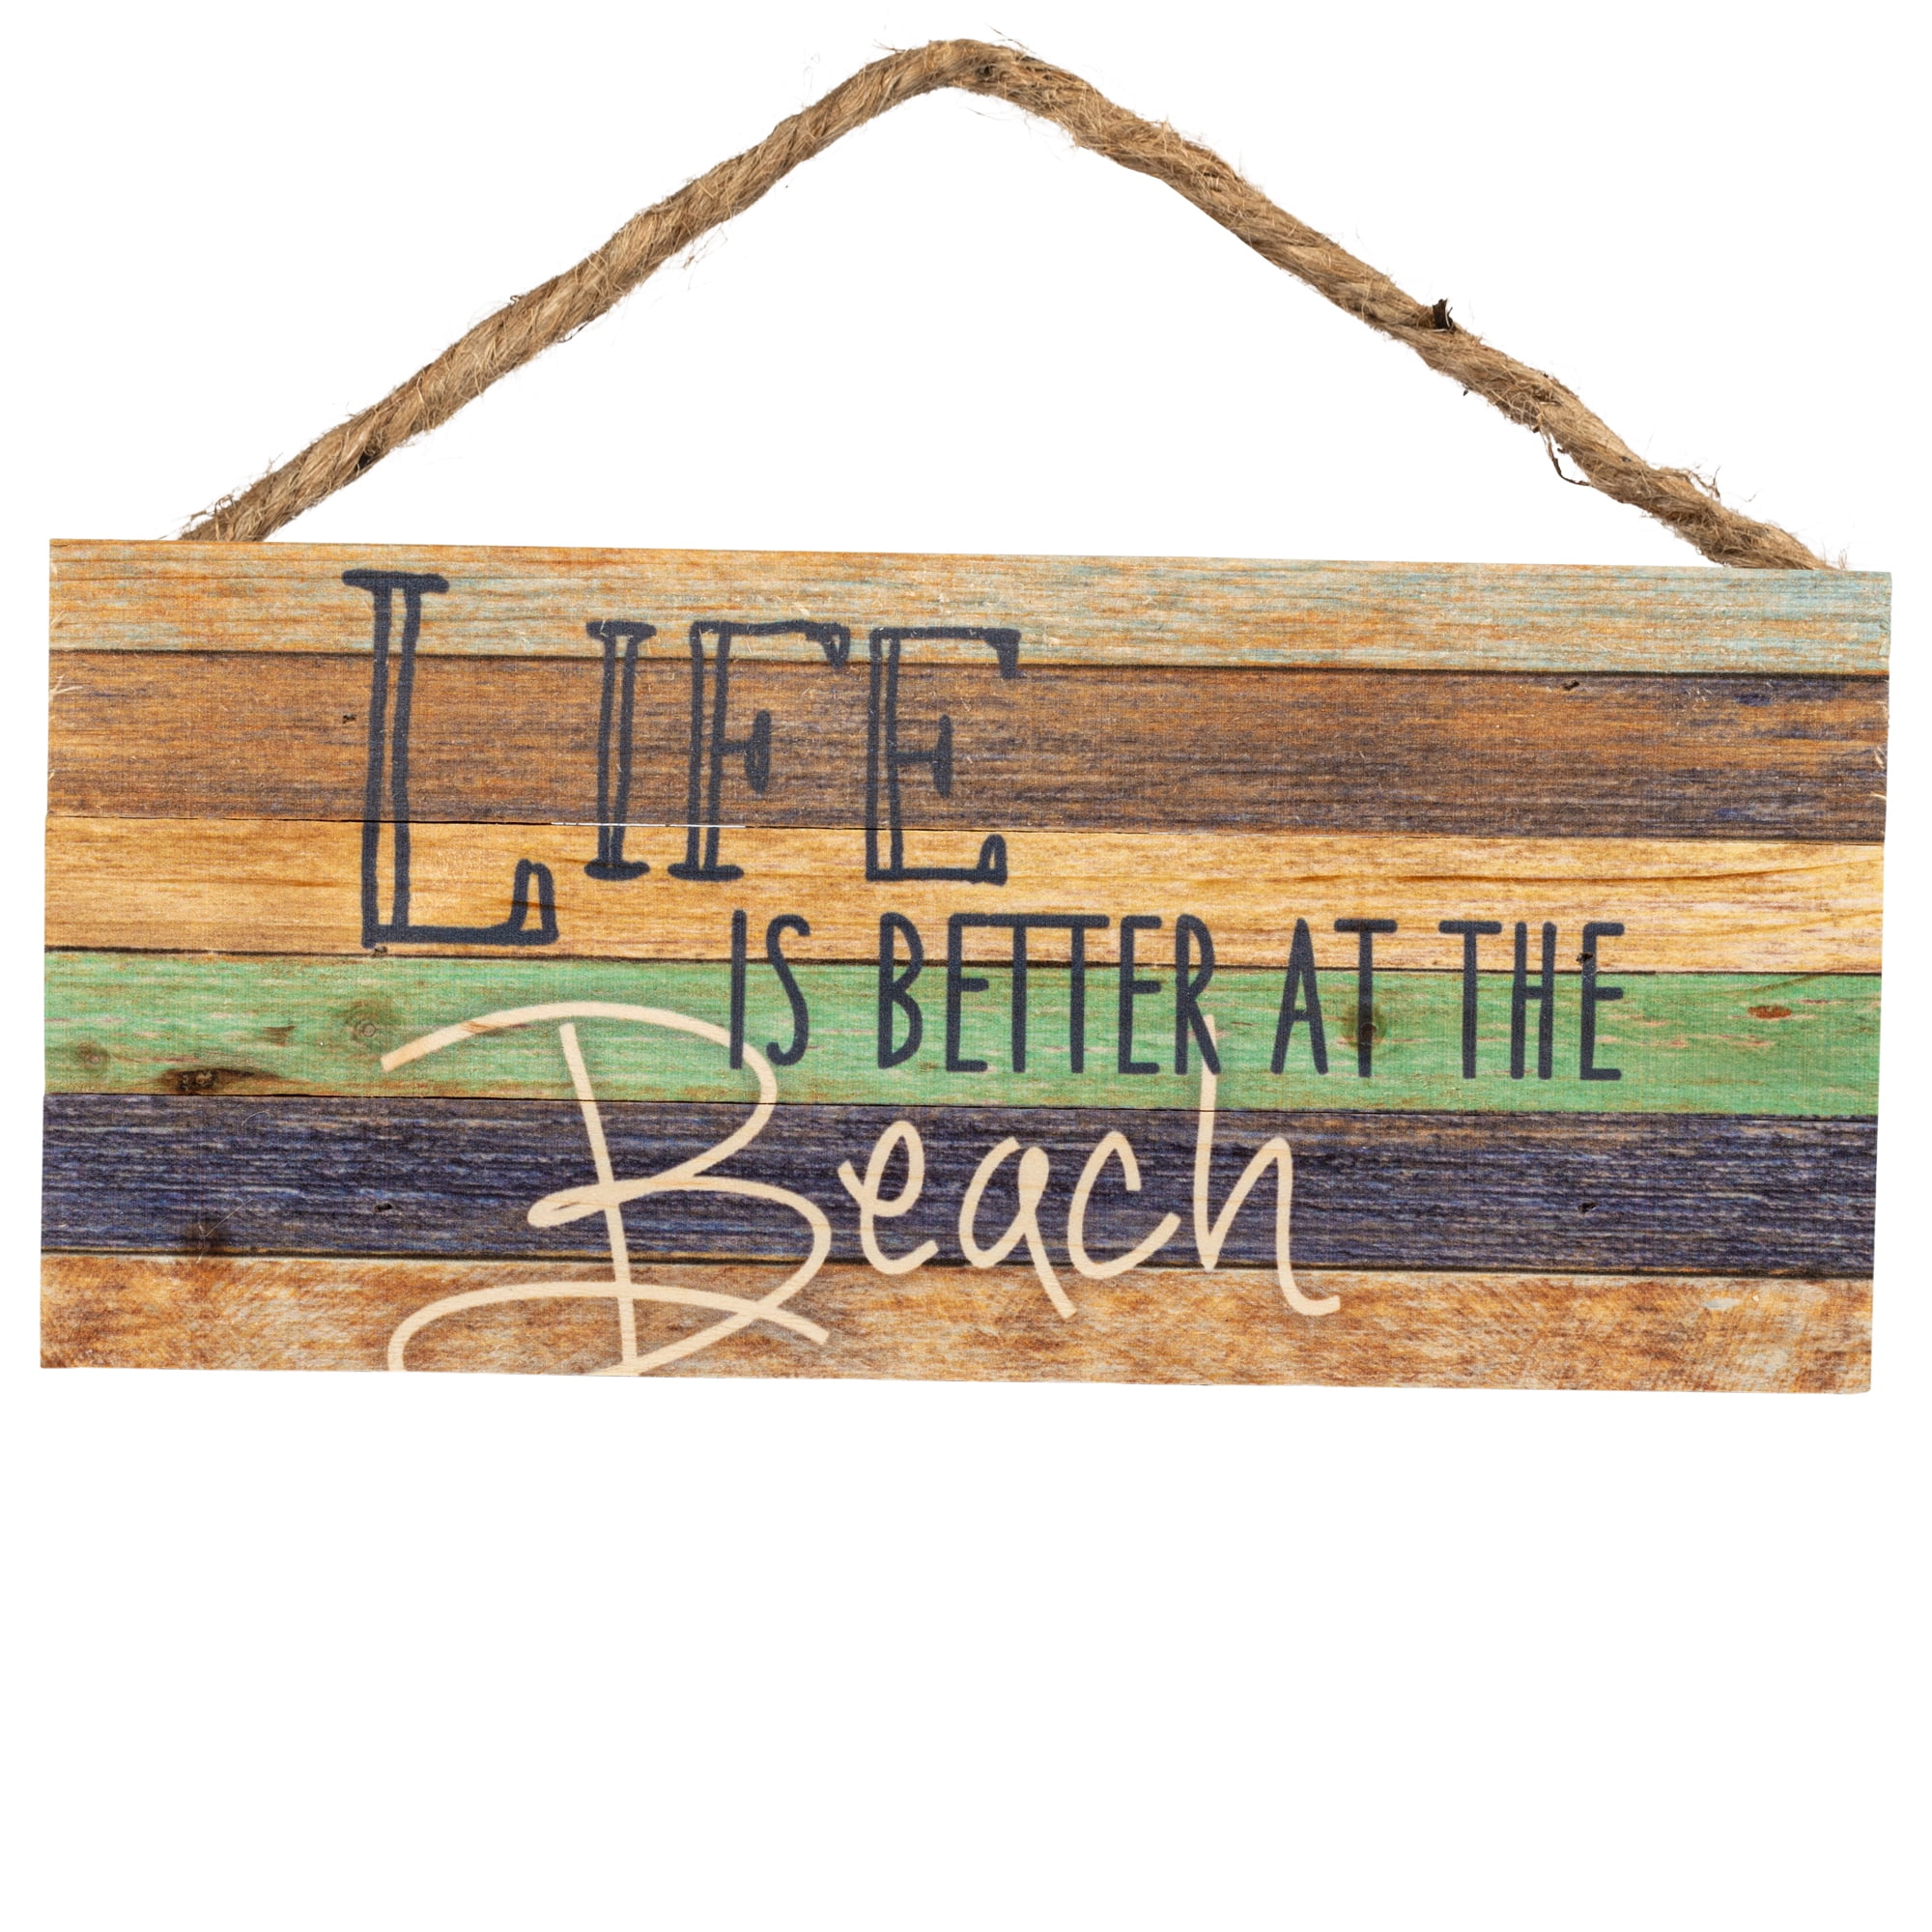 FOOTPRINTS IN THE SAND Distressed Pallet Wood Sign 20" x 10.5"